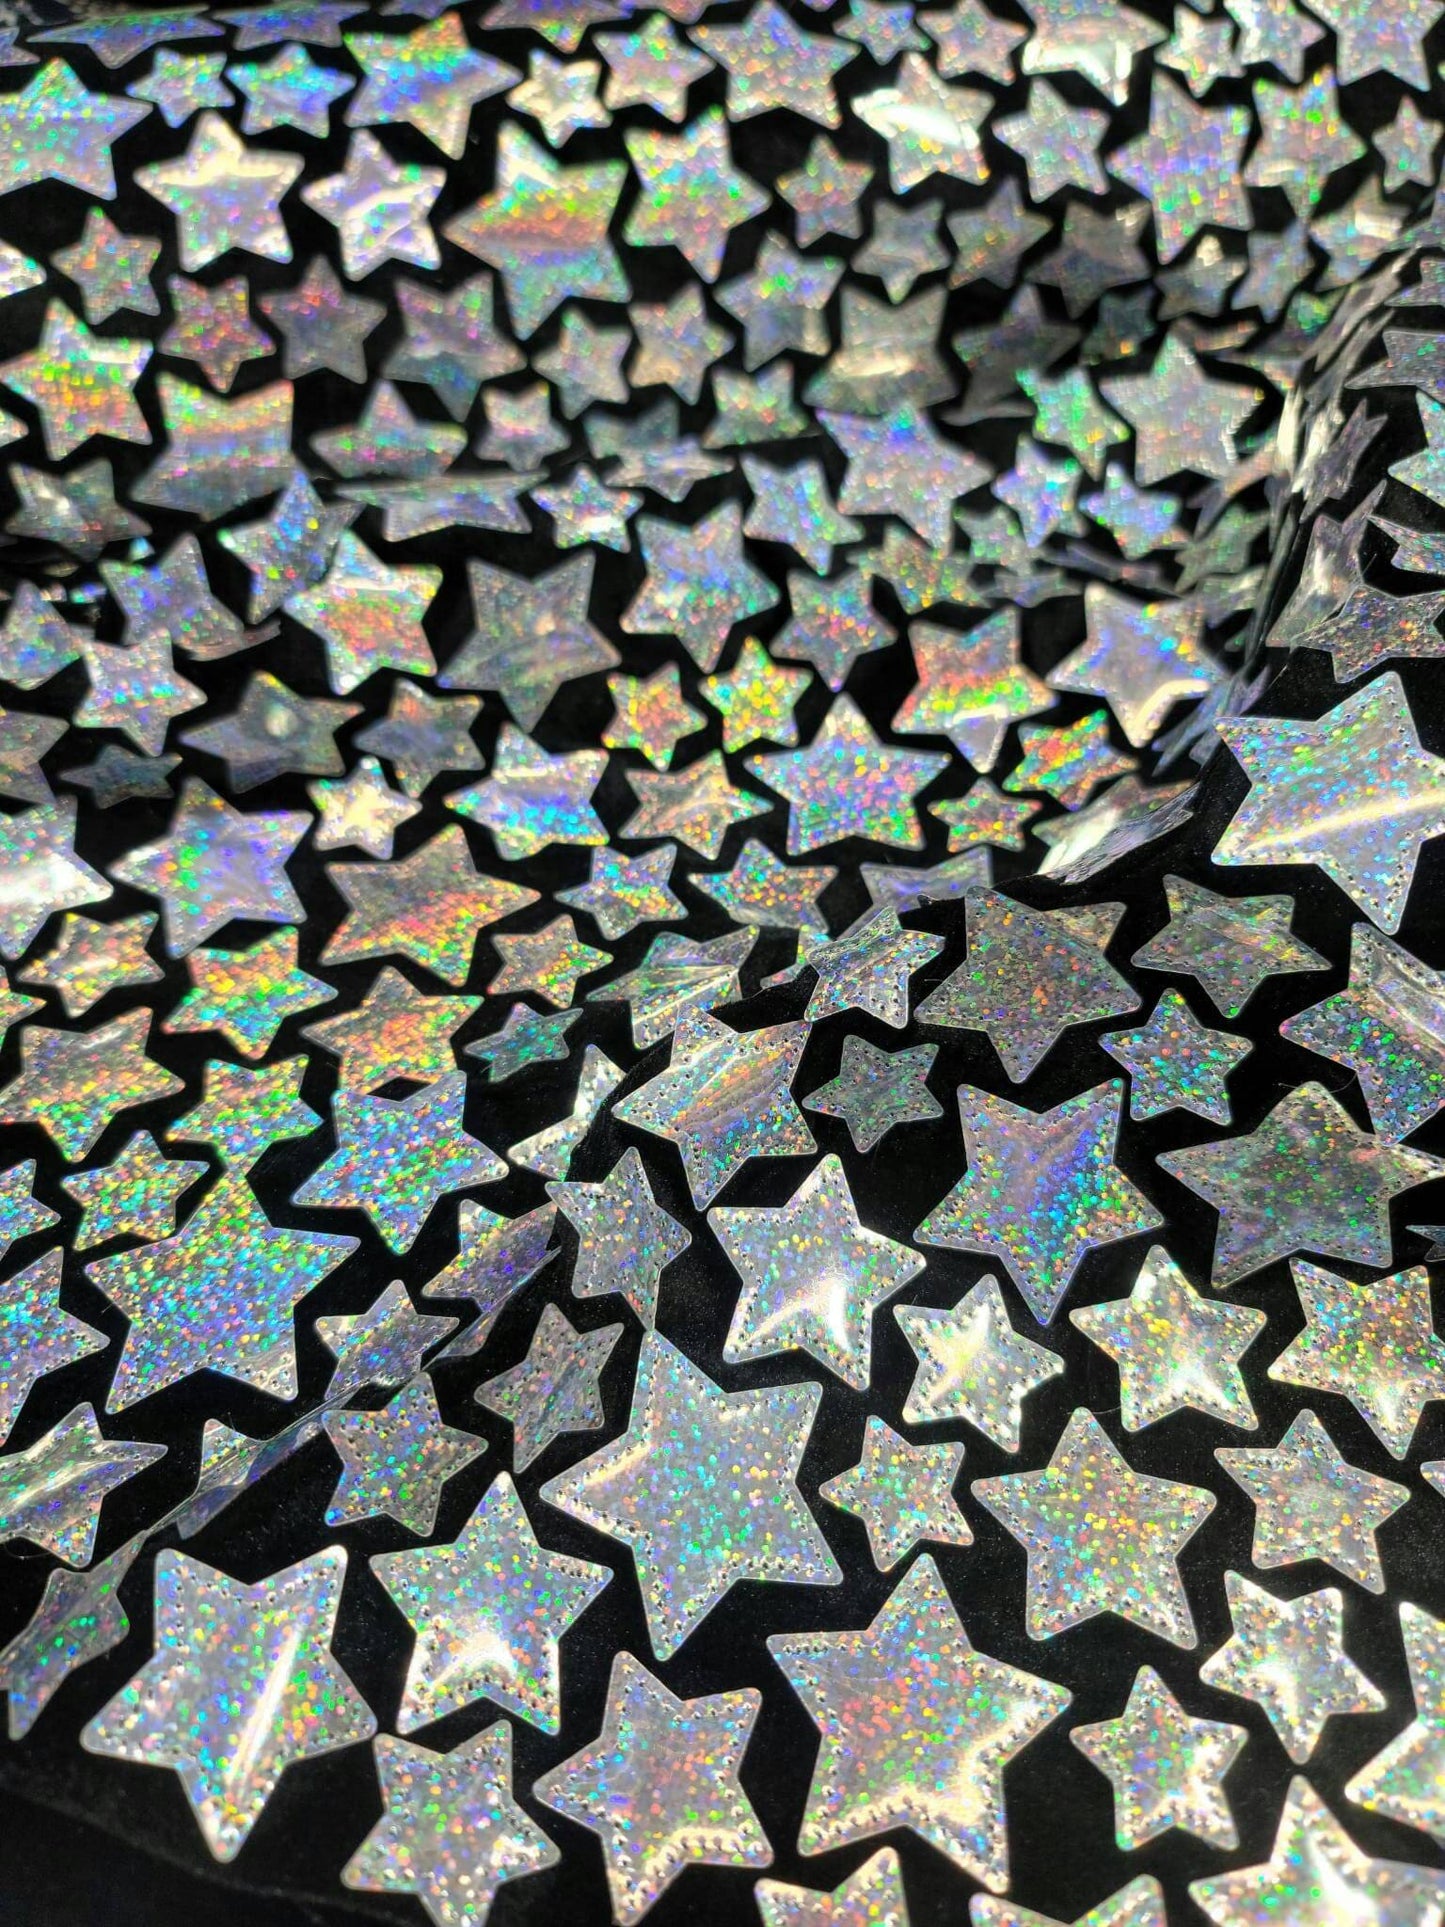 Silver Sequin Iridescent Embroidery Stars On Black Stretch Velvet Fabric By The Yard Fashion Dress Clothing Backdrop Party Dress